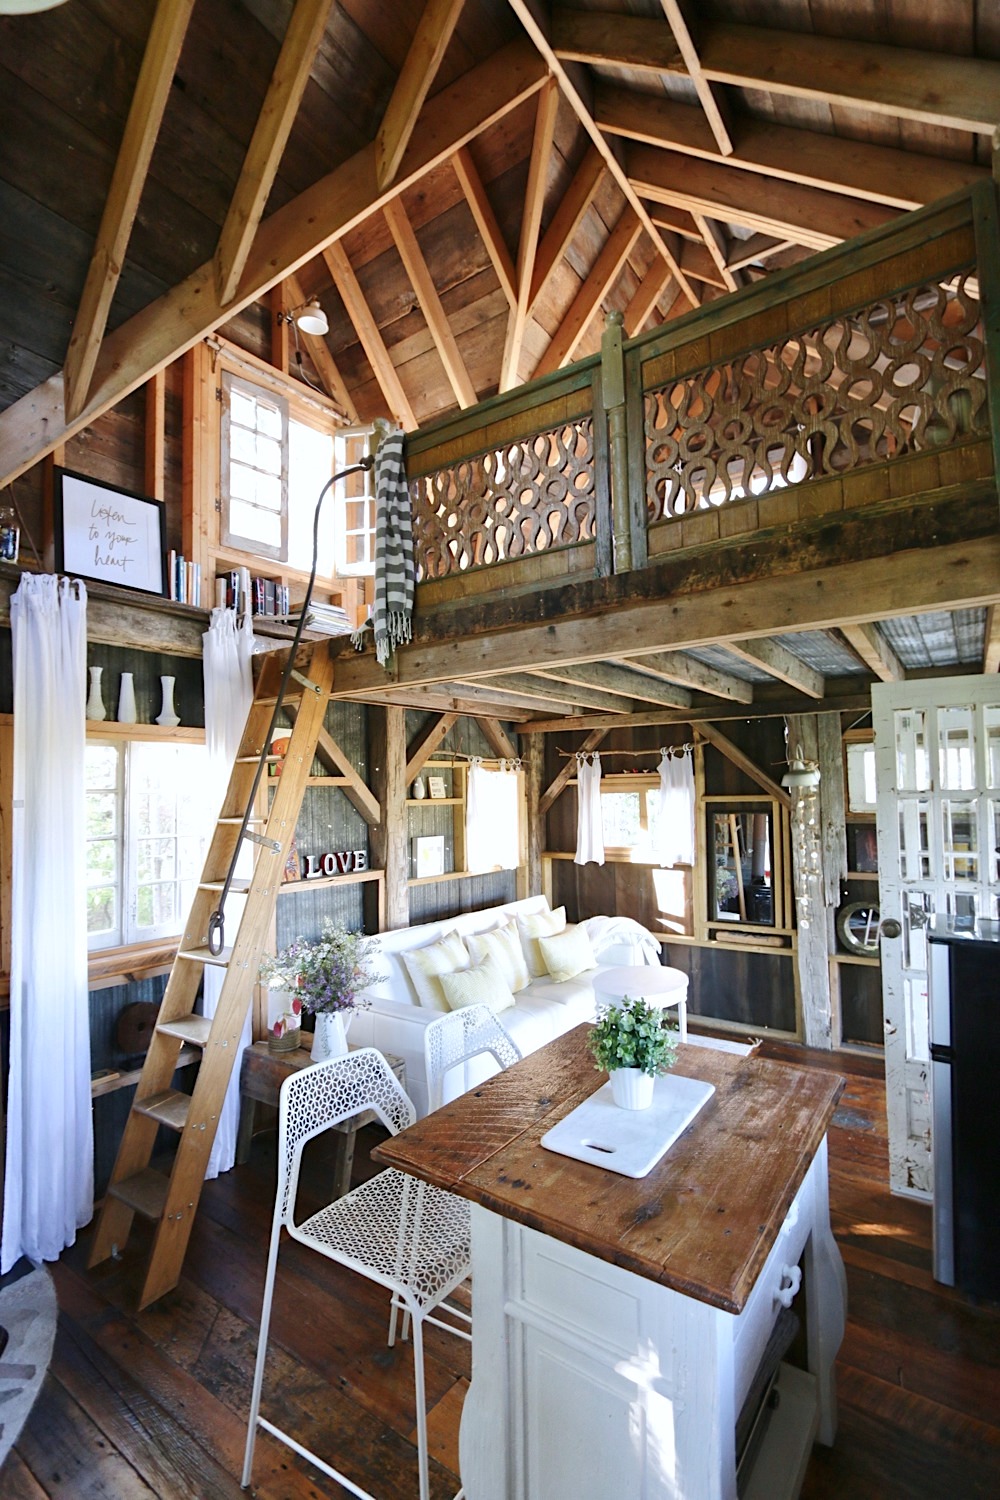 Experience sleeping in a #treehouse ! Ranked one of the top treehouses in the world! www.lynneknowlton.com